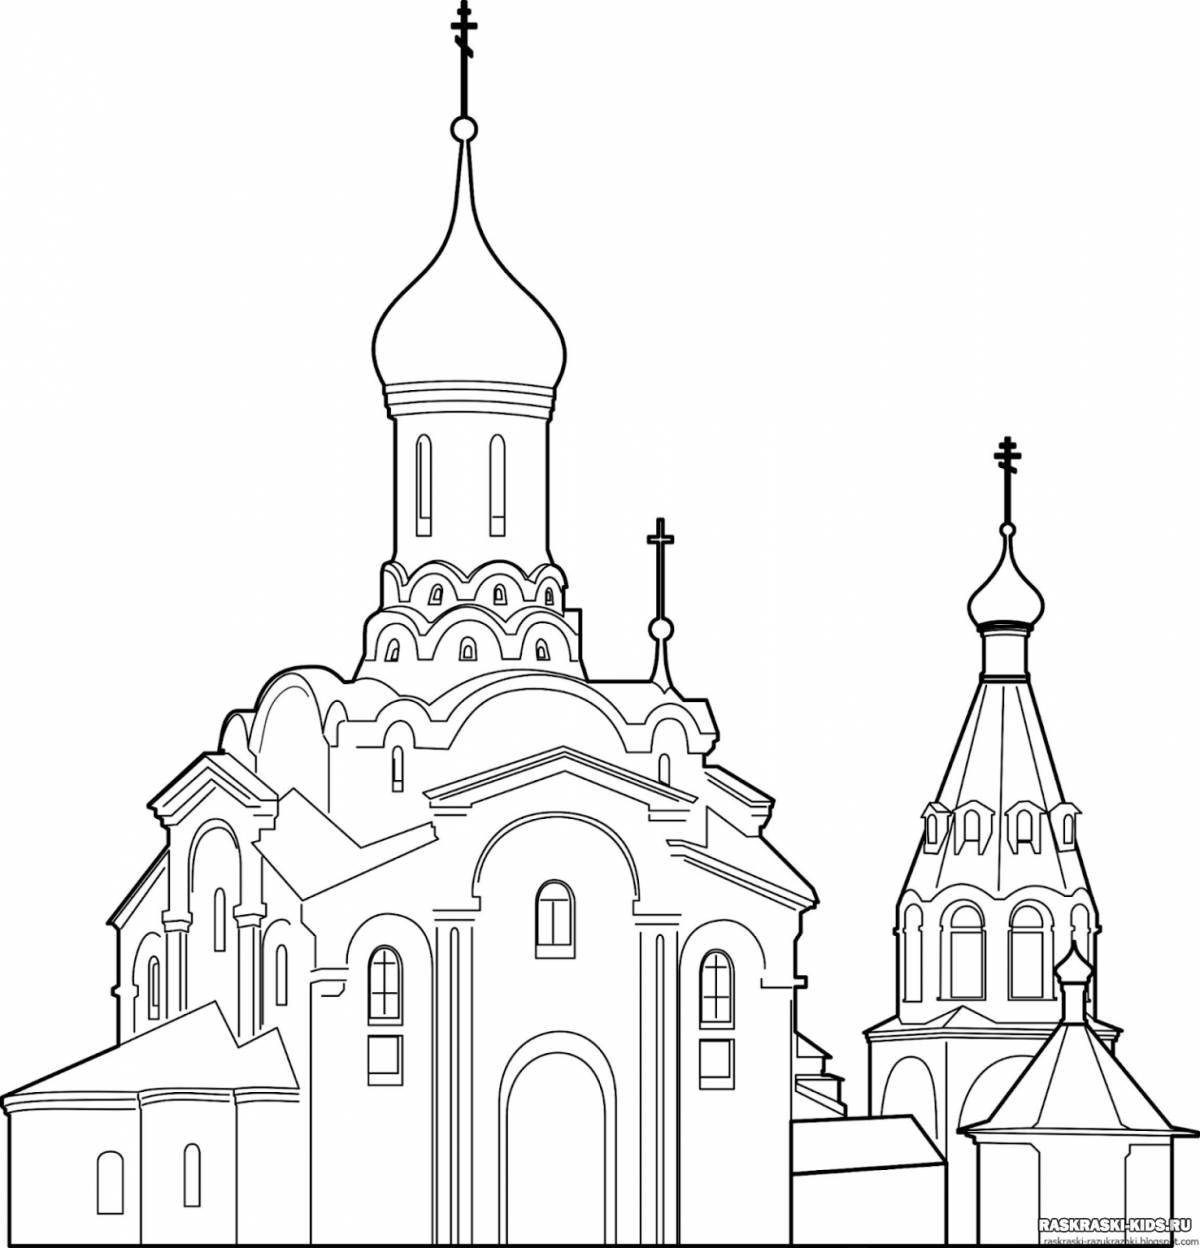 Elegant dome church coloring book for kids